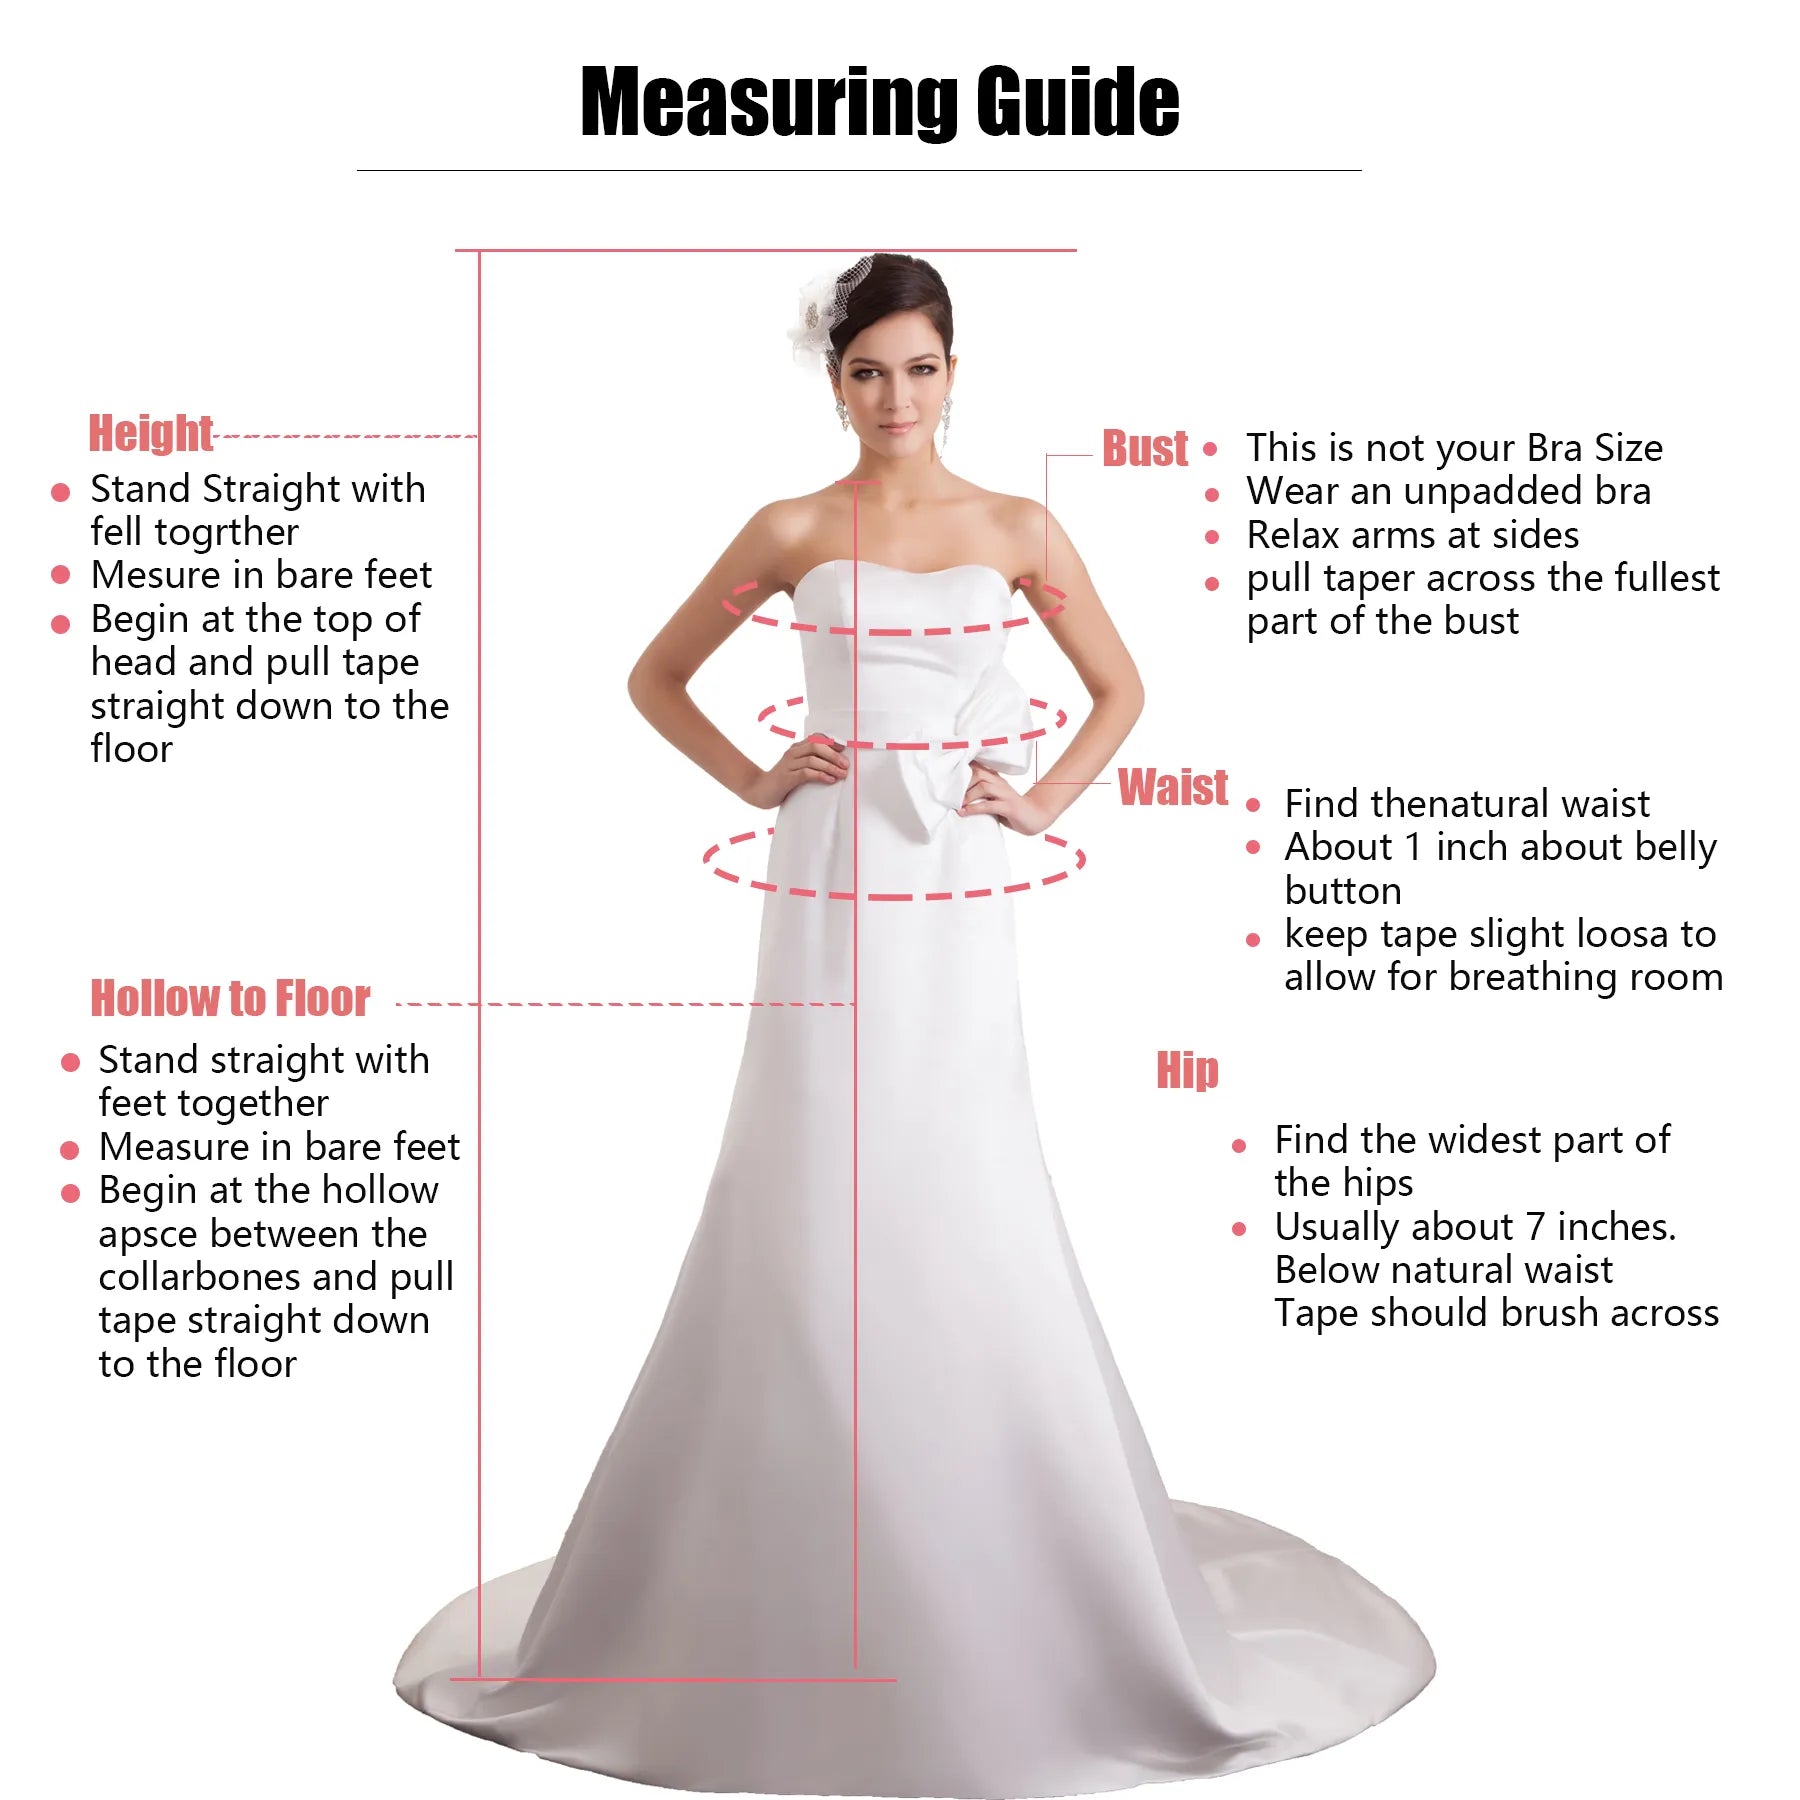 Sweetheart Lace Applique Wedding Dresses Romantic Off Shoulder Sleeveless High Split Fluffy Princess Style Mopping Bride Gowns